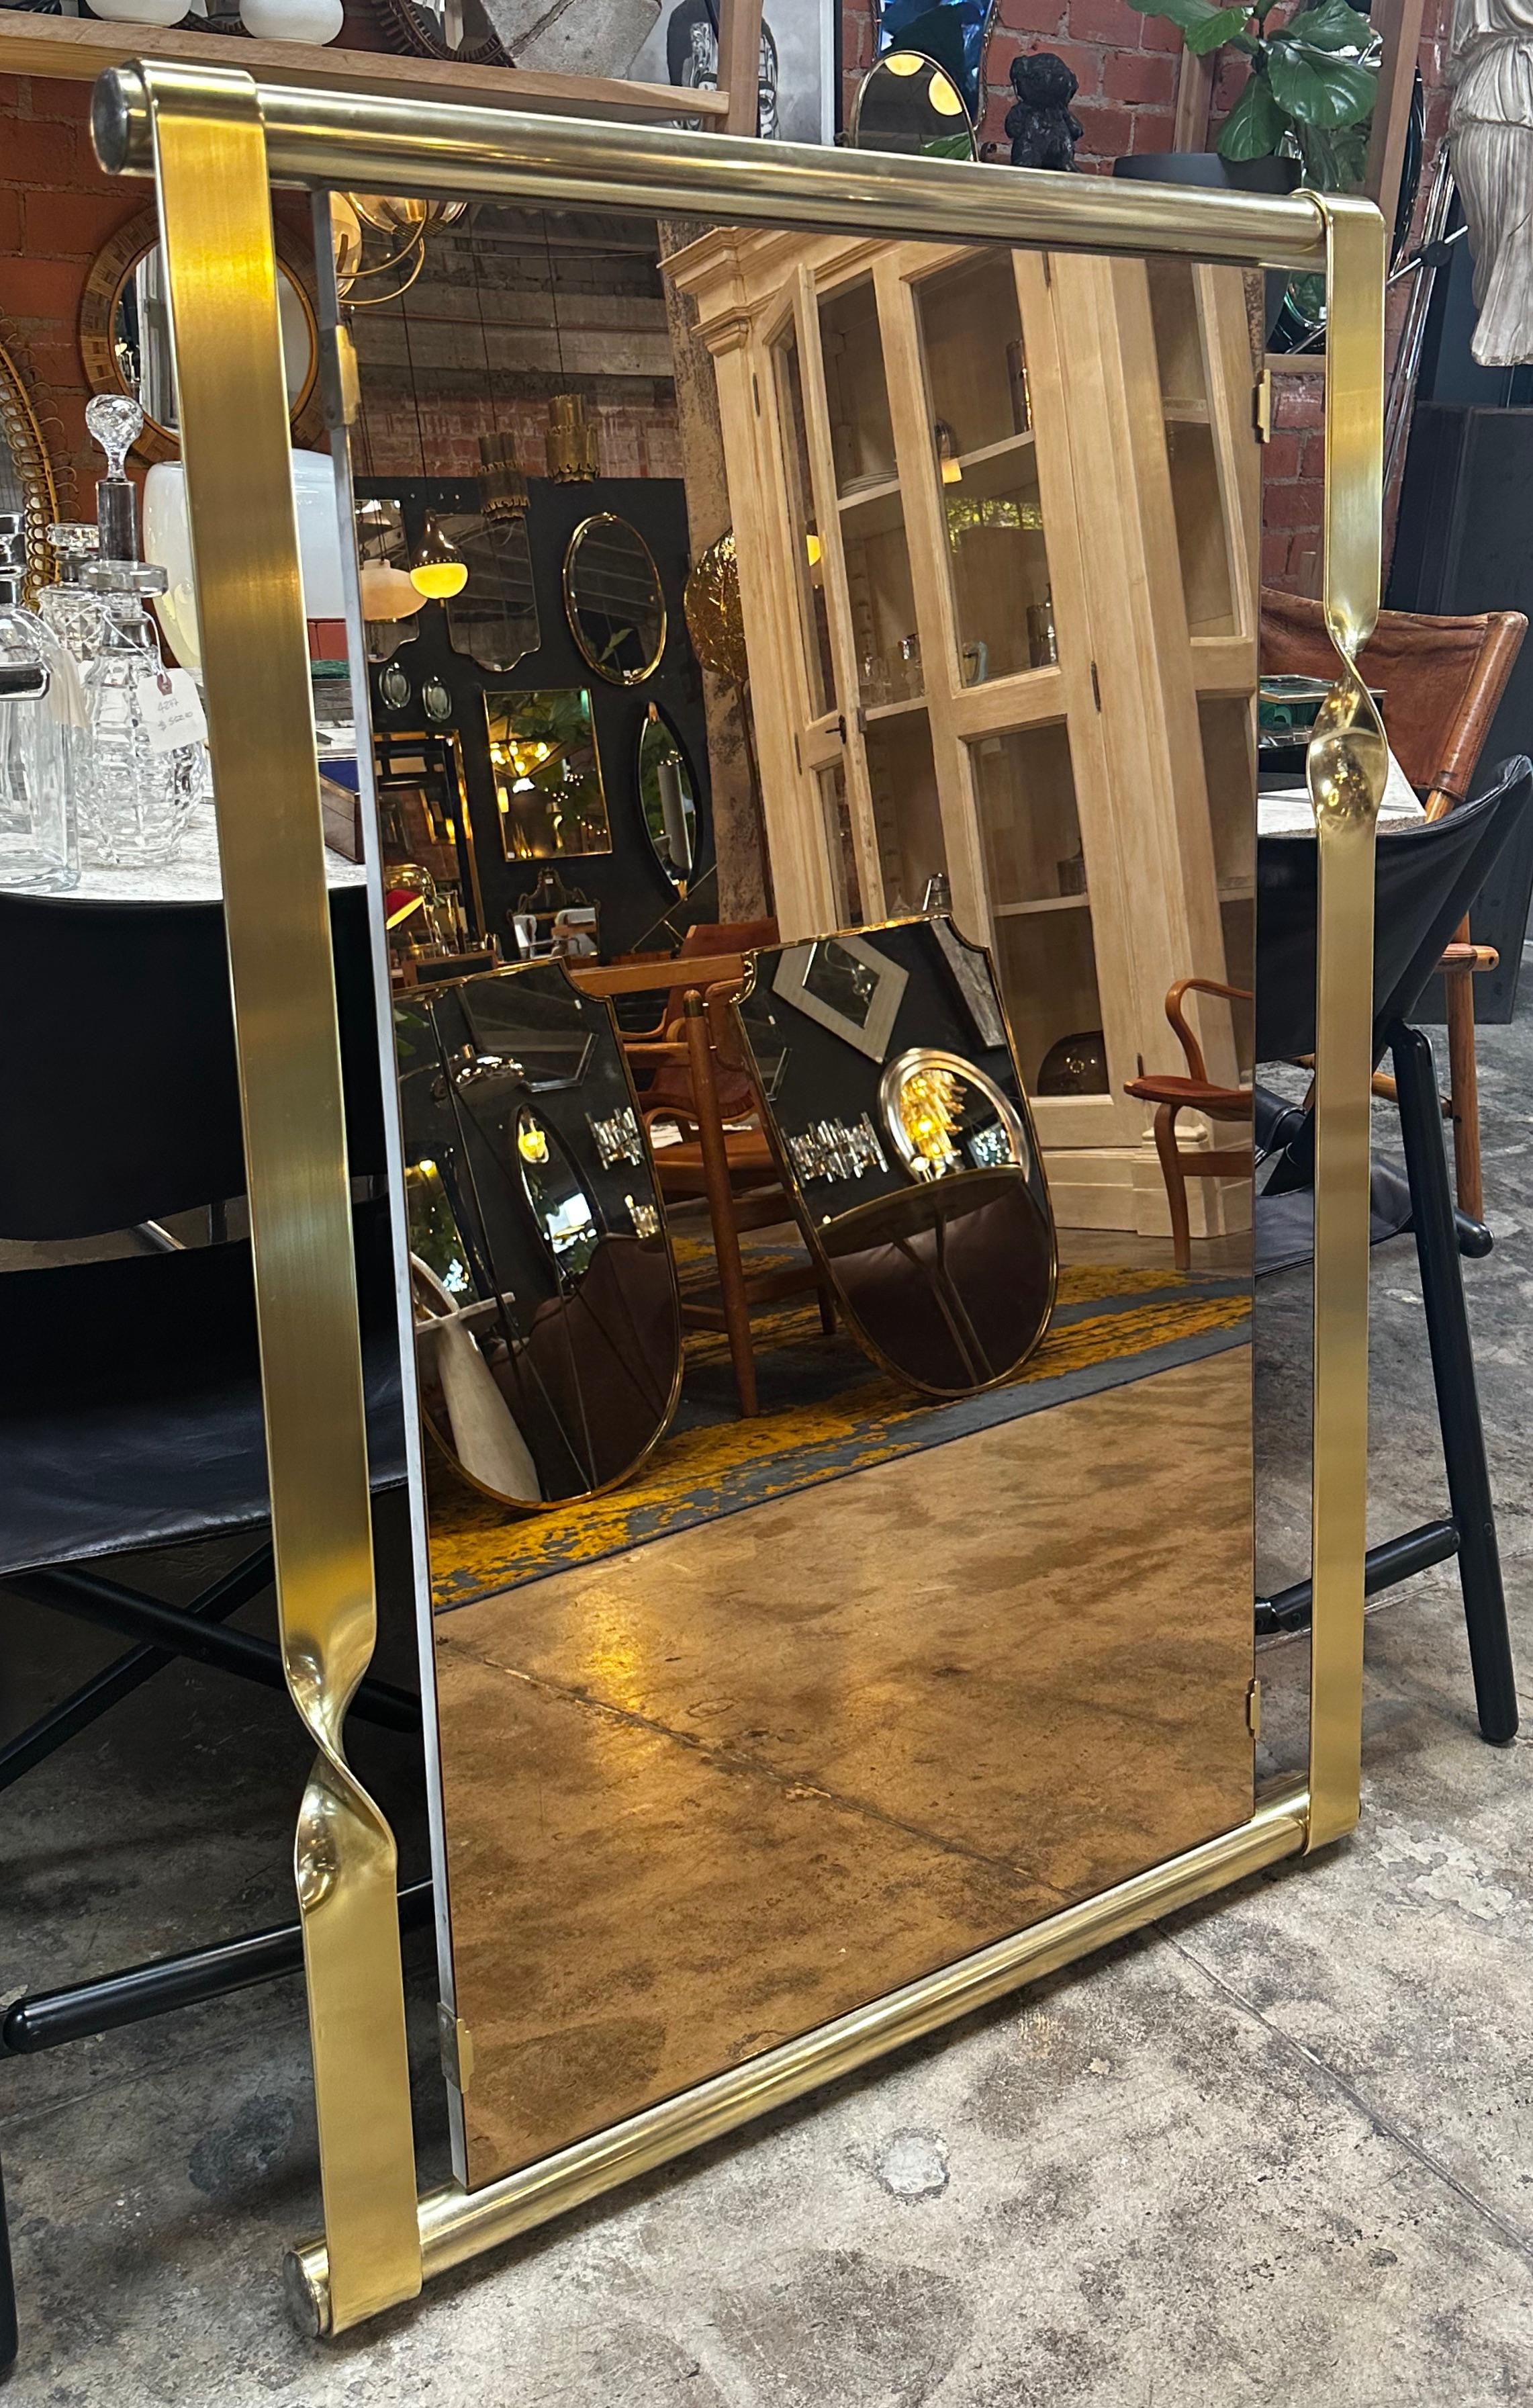 The rectangular mirror by Aldo Frigerio is an elegant and luxurious piece crafted entirely in brass. The mirror features a clean and Minimalist design, with a thin and sleek brass frame that surrounds the reflective surface. The rectangular shape of